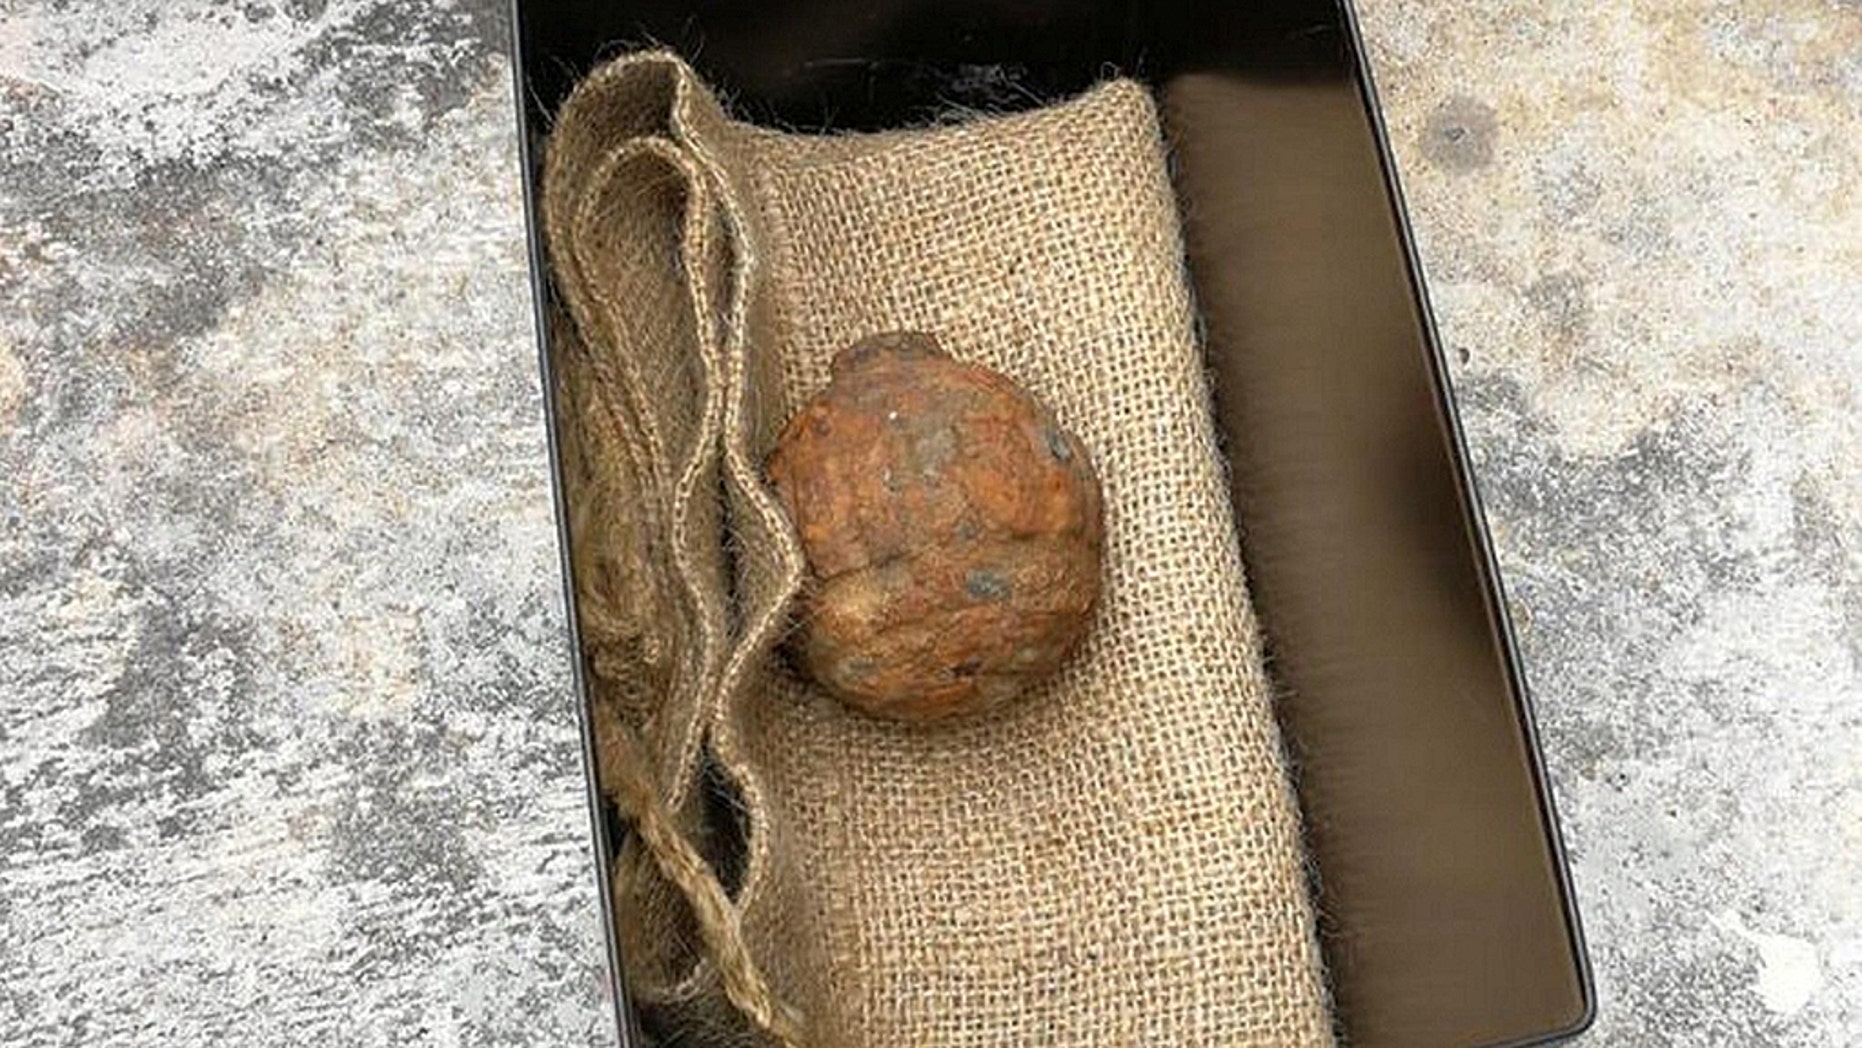 WWI grenade found in potato sack in chip factory